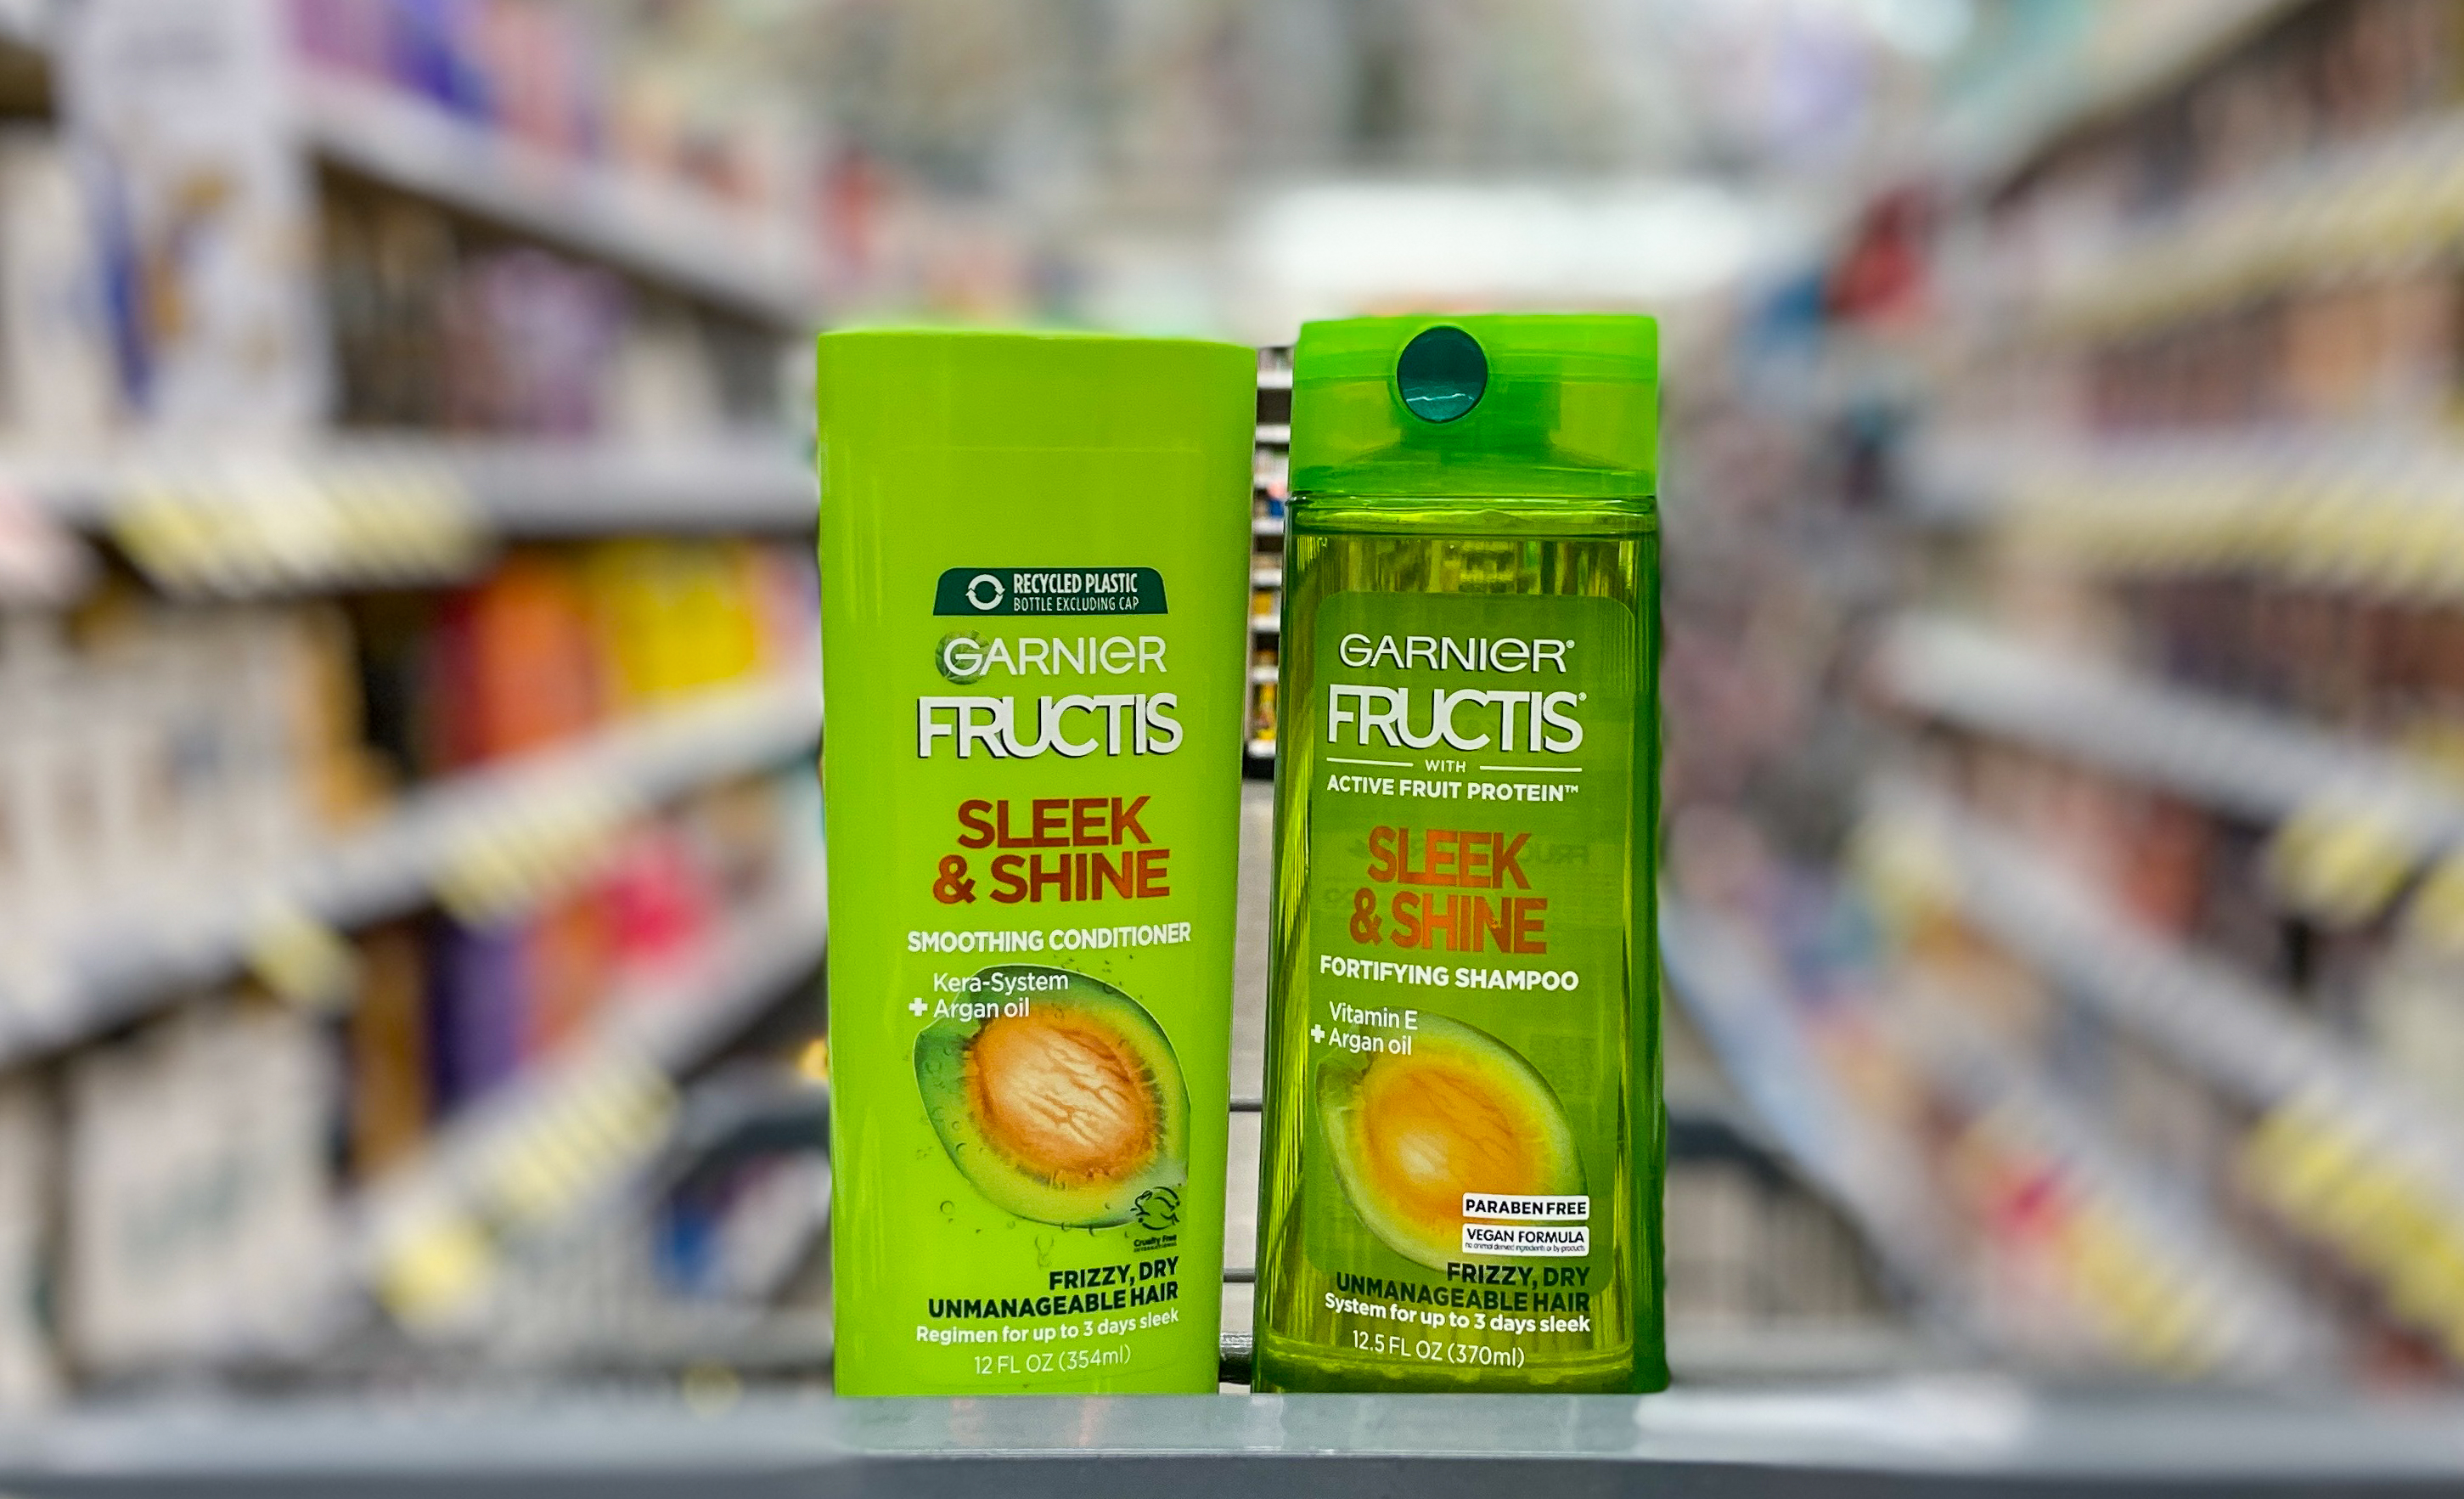 Garnier Fructis Hair Care, Just $ at Walgreens - The Krazy Coupon Lady